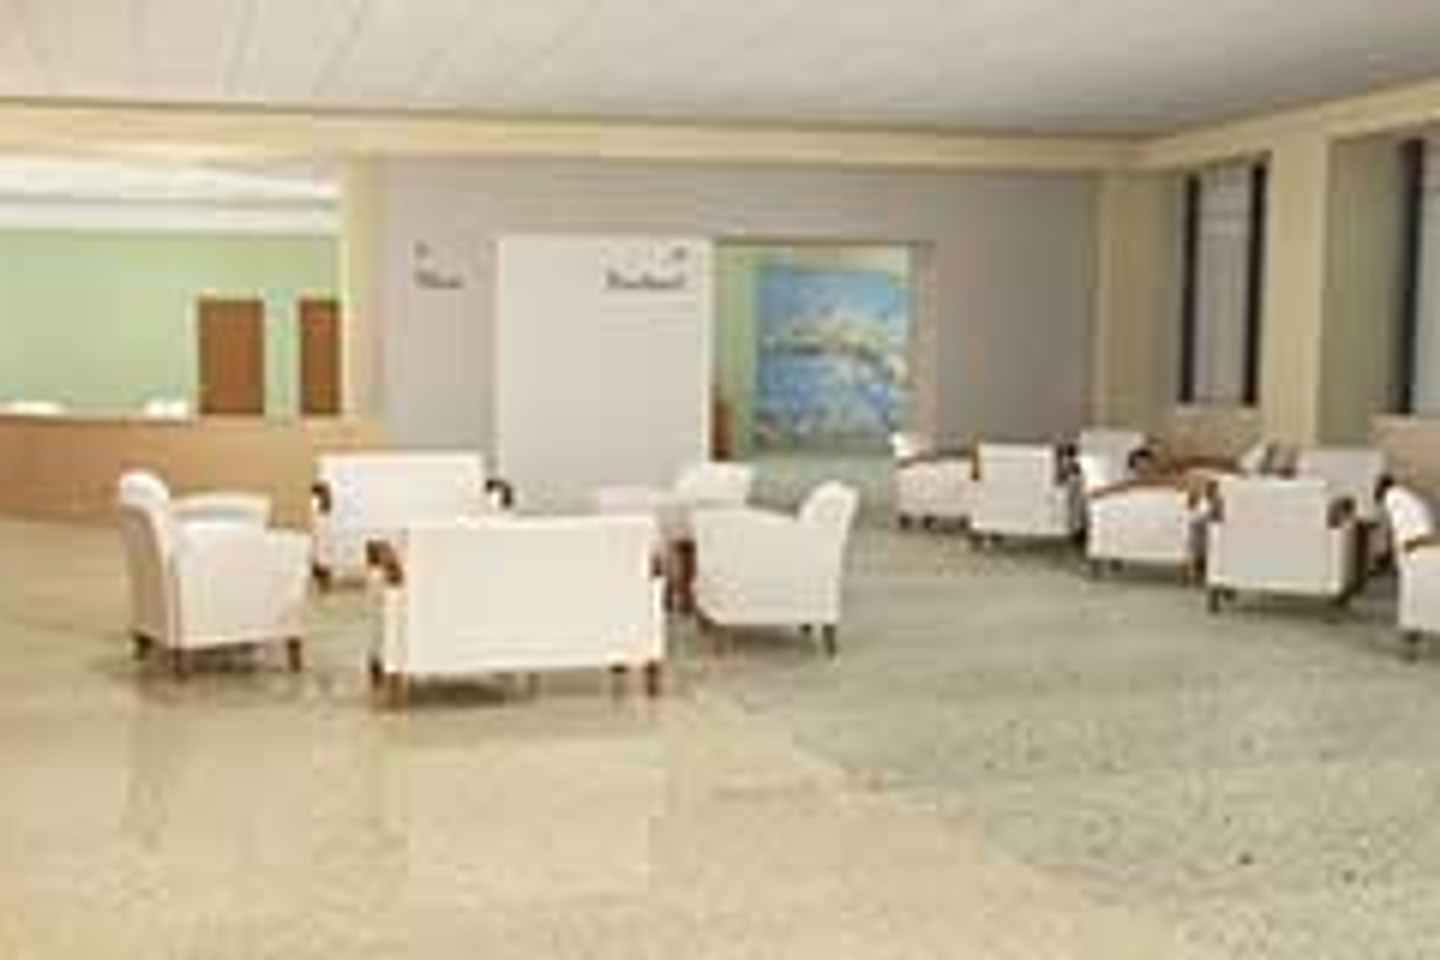 Interior view of the Reston Hospital Center main lobby, with a large open room for patient seating and a customer service desk towards the back of the room.